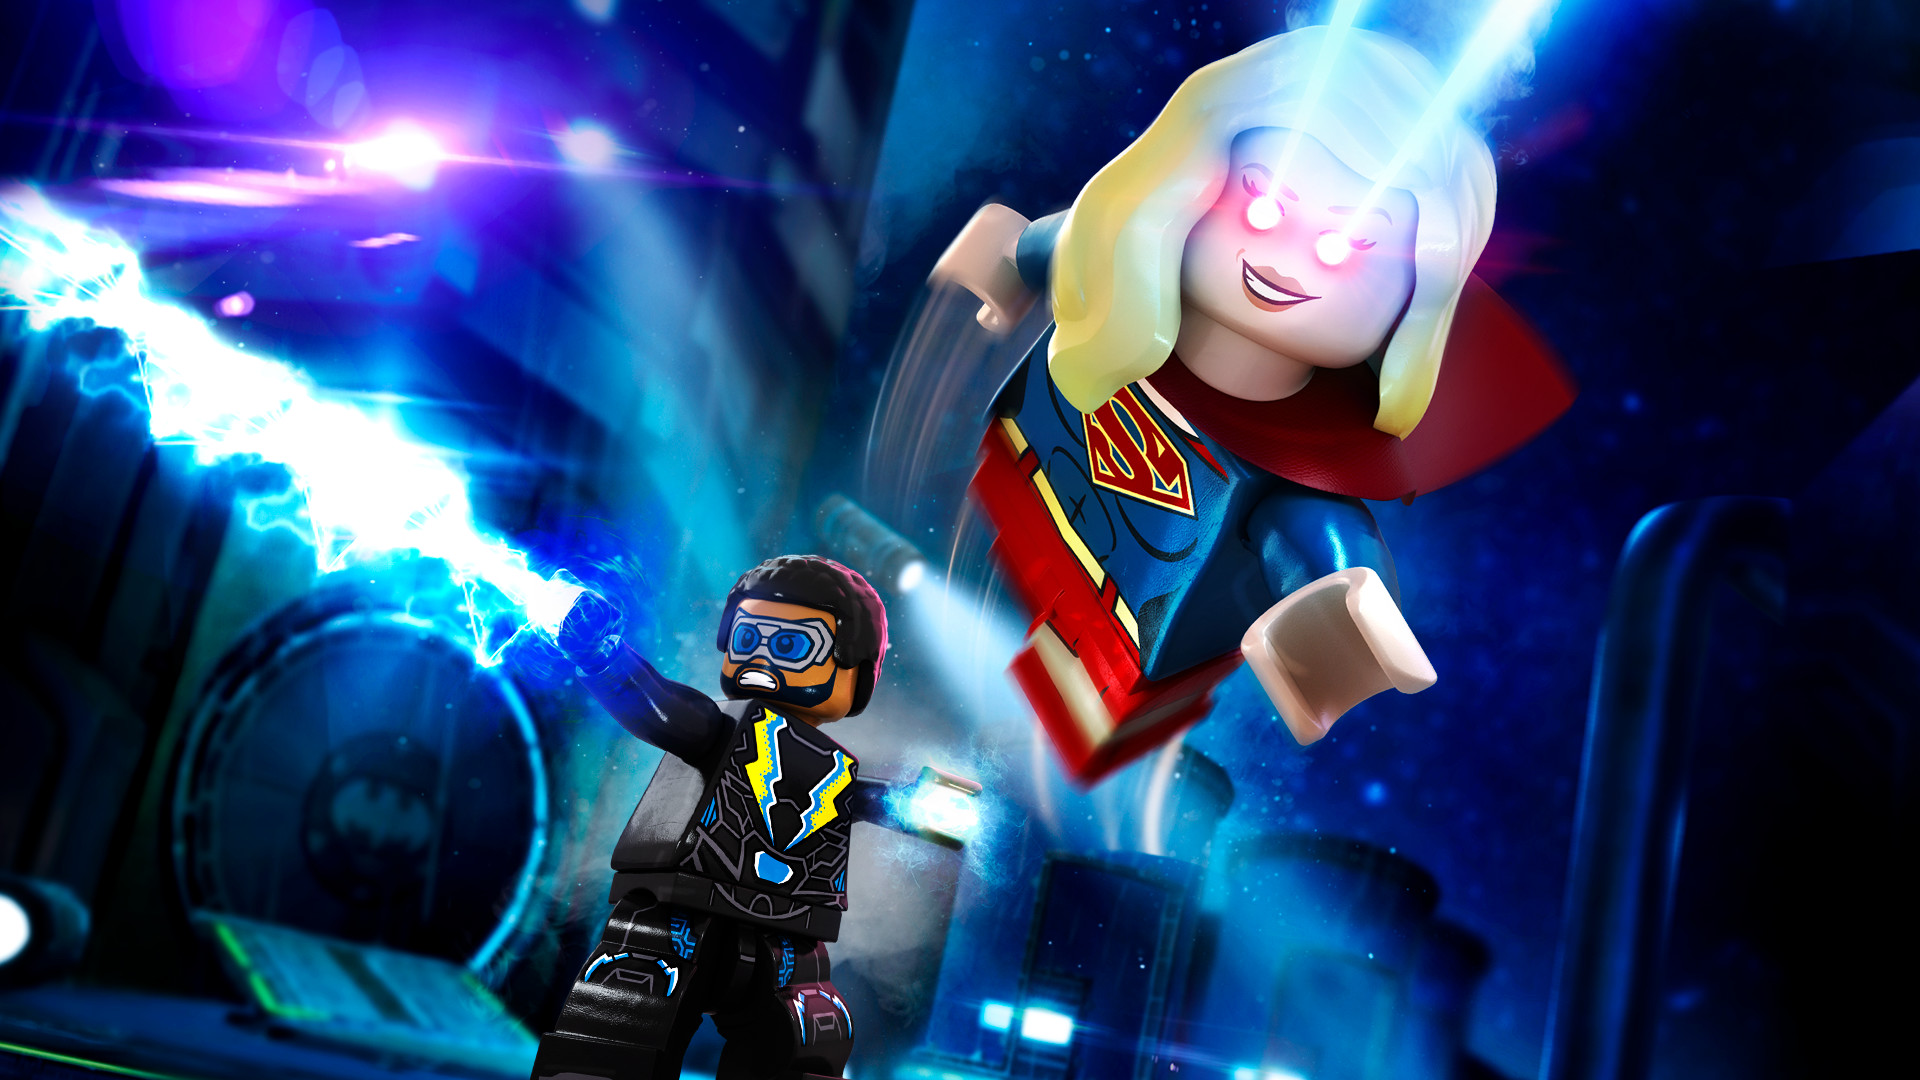 LEGO® DC TV Series Super Heroes Character Pack on Steam